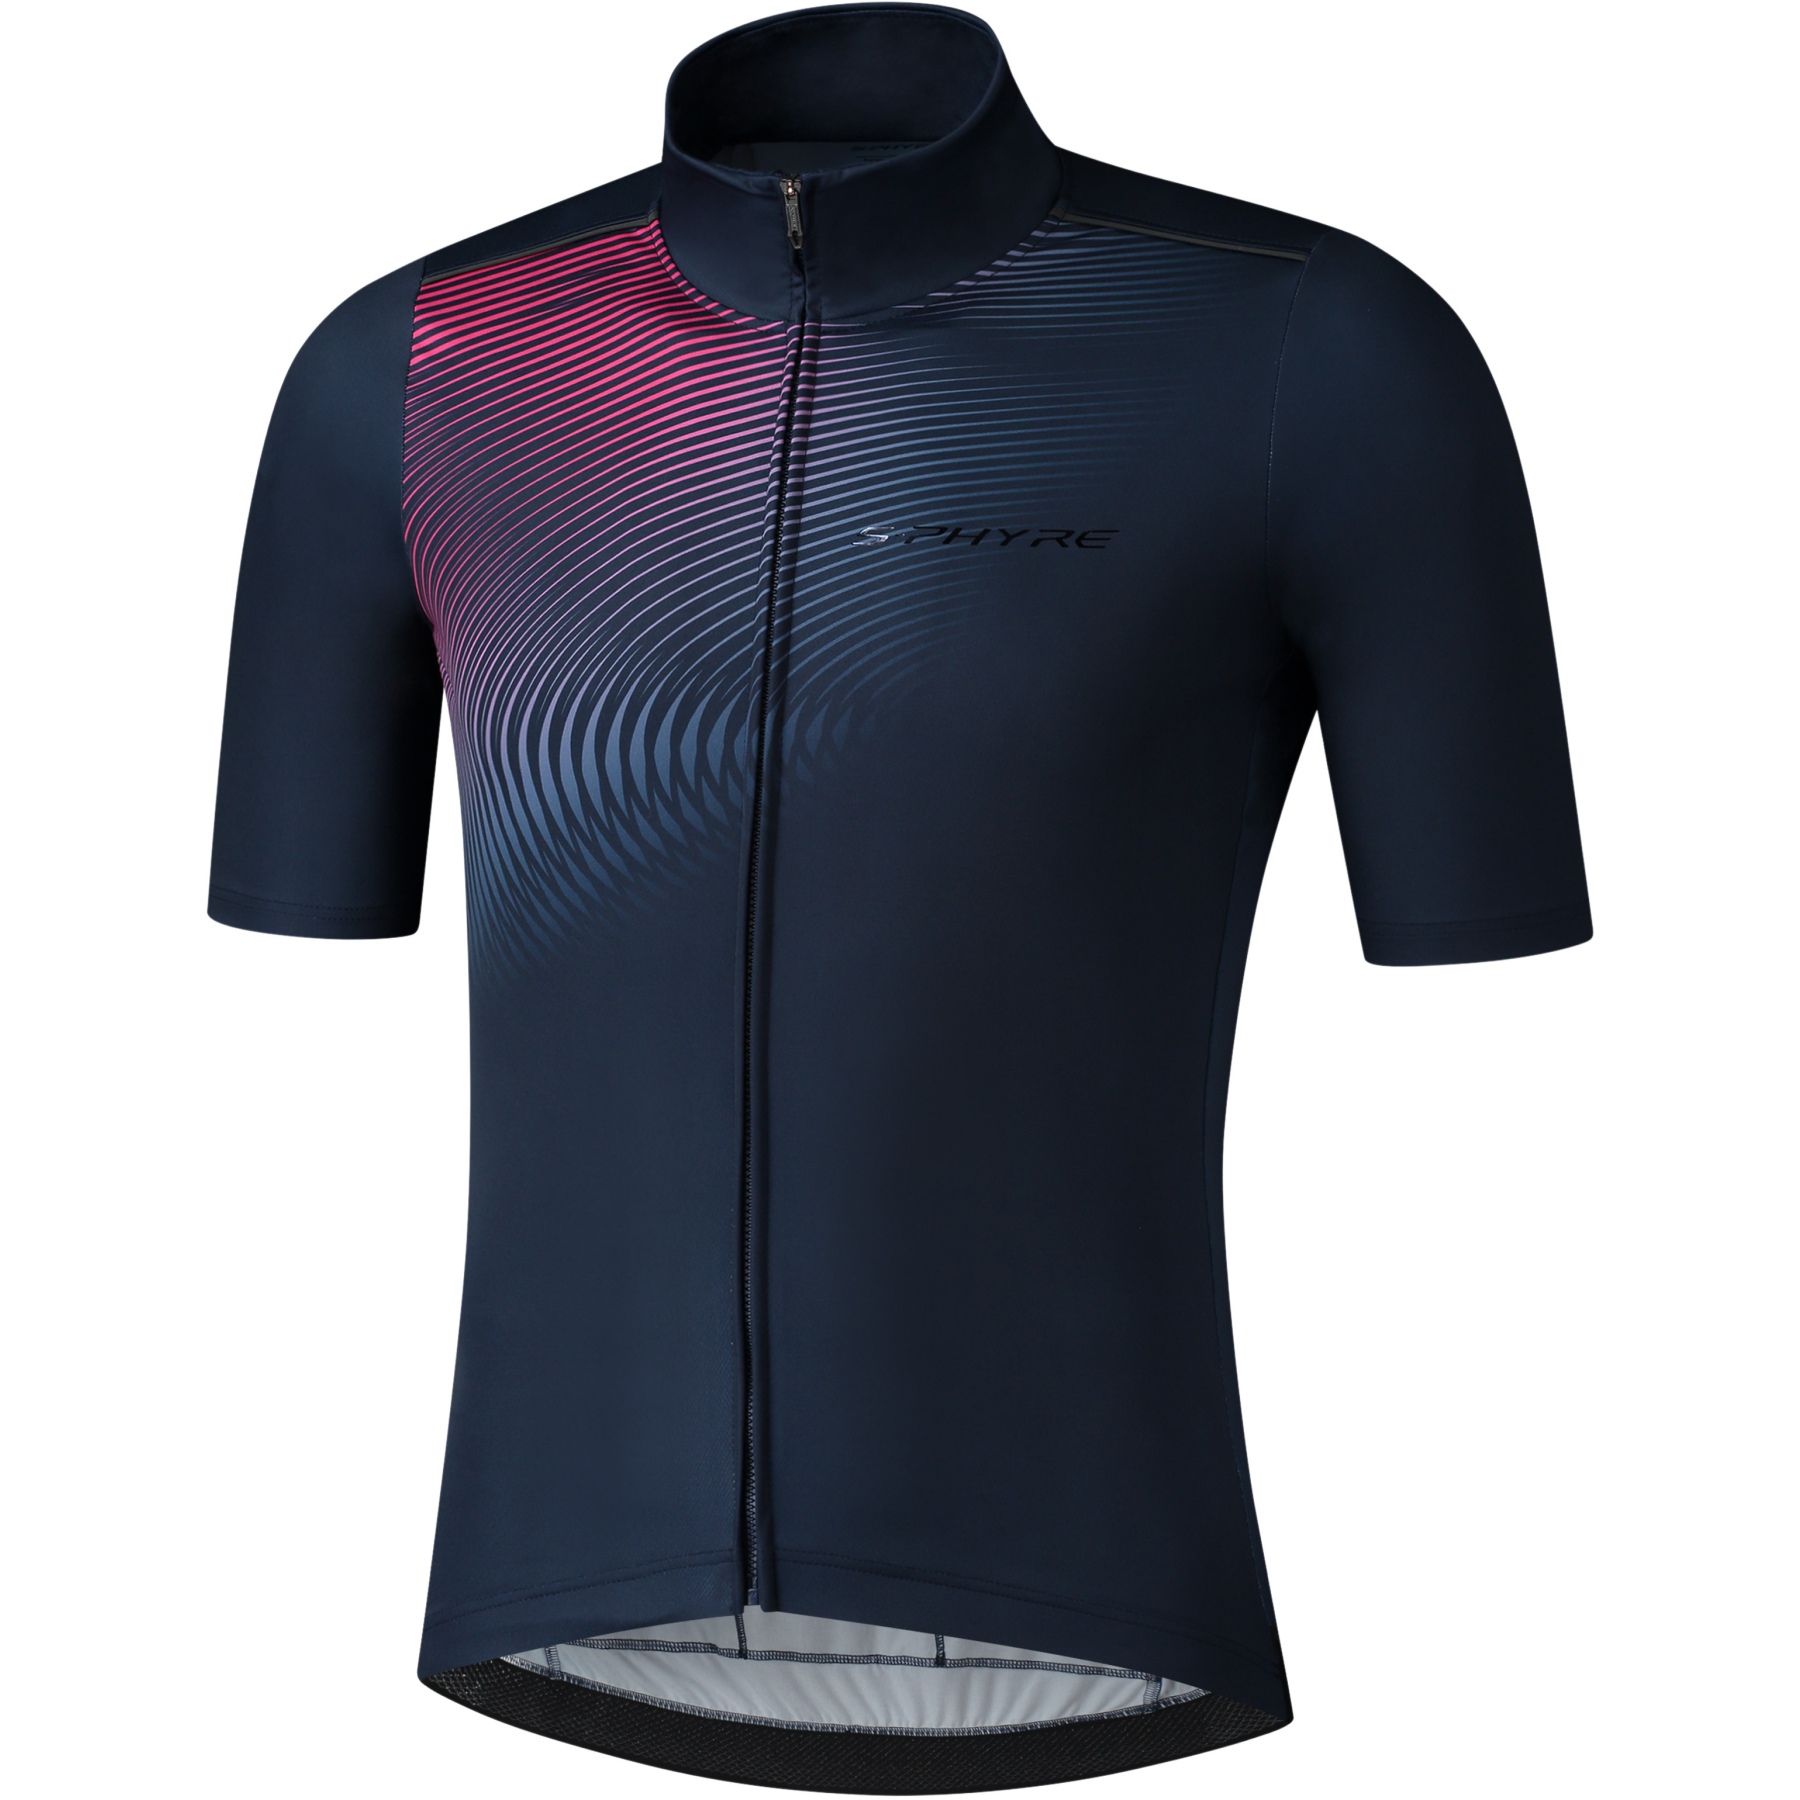 Picture of Shimano S-Phyre Short Sleeves Wind Jacket Men - black/red